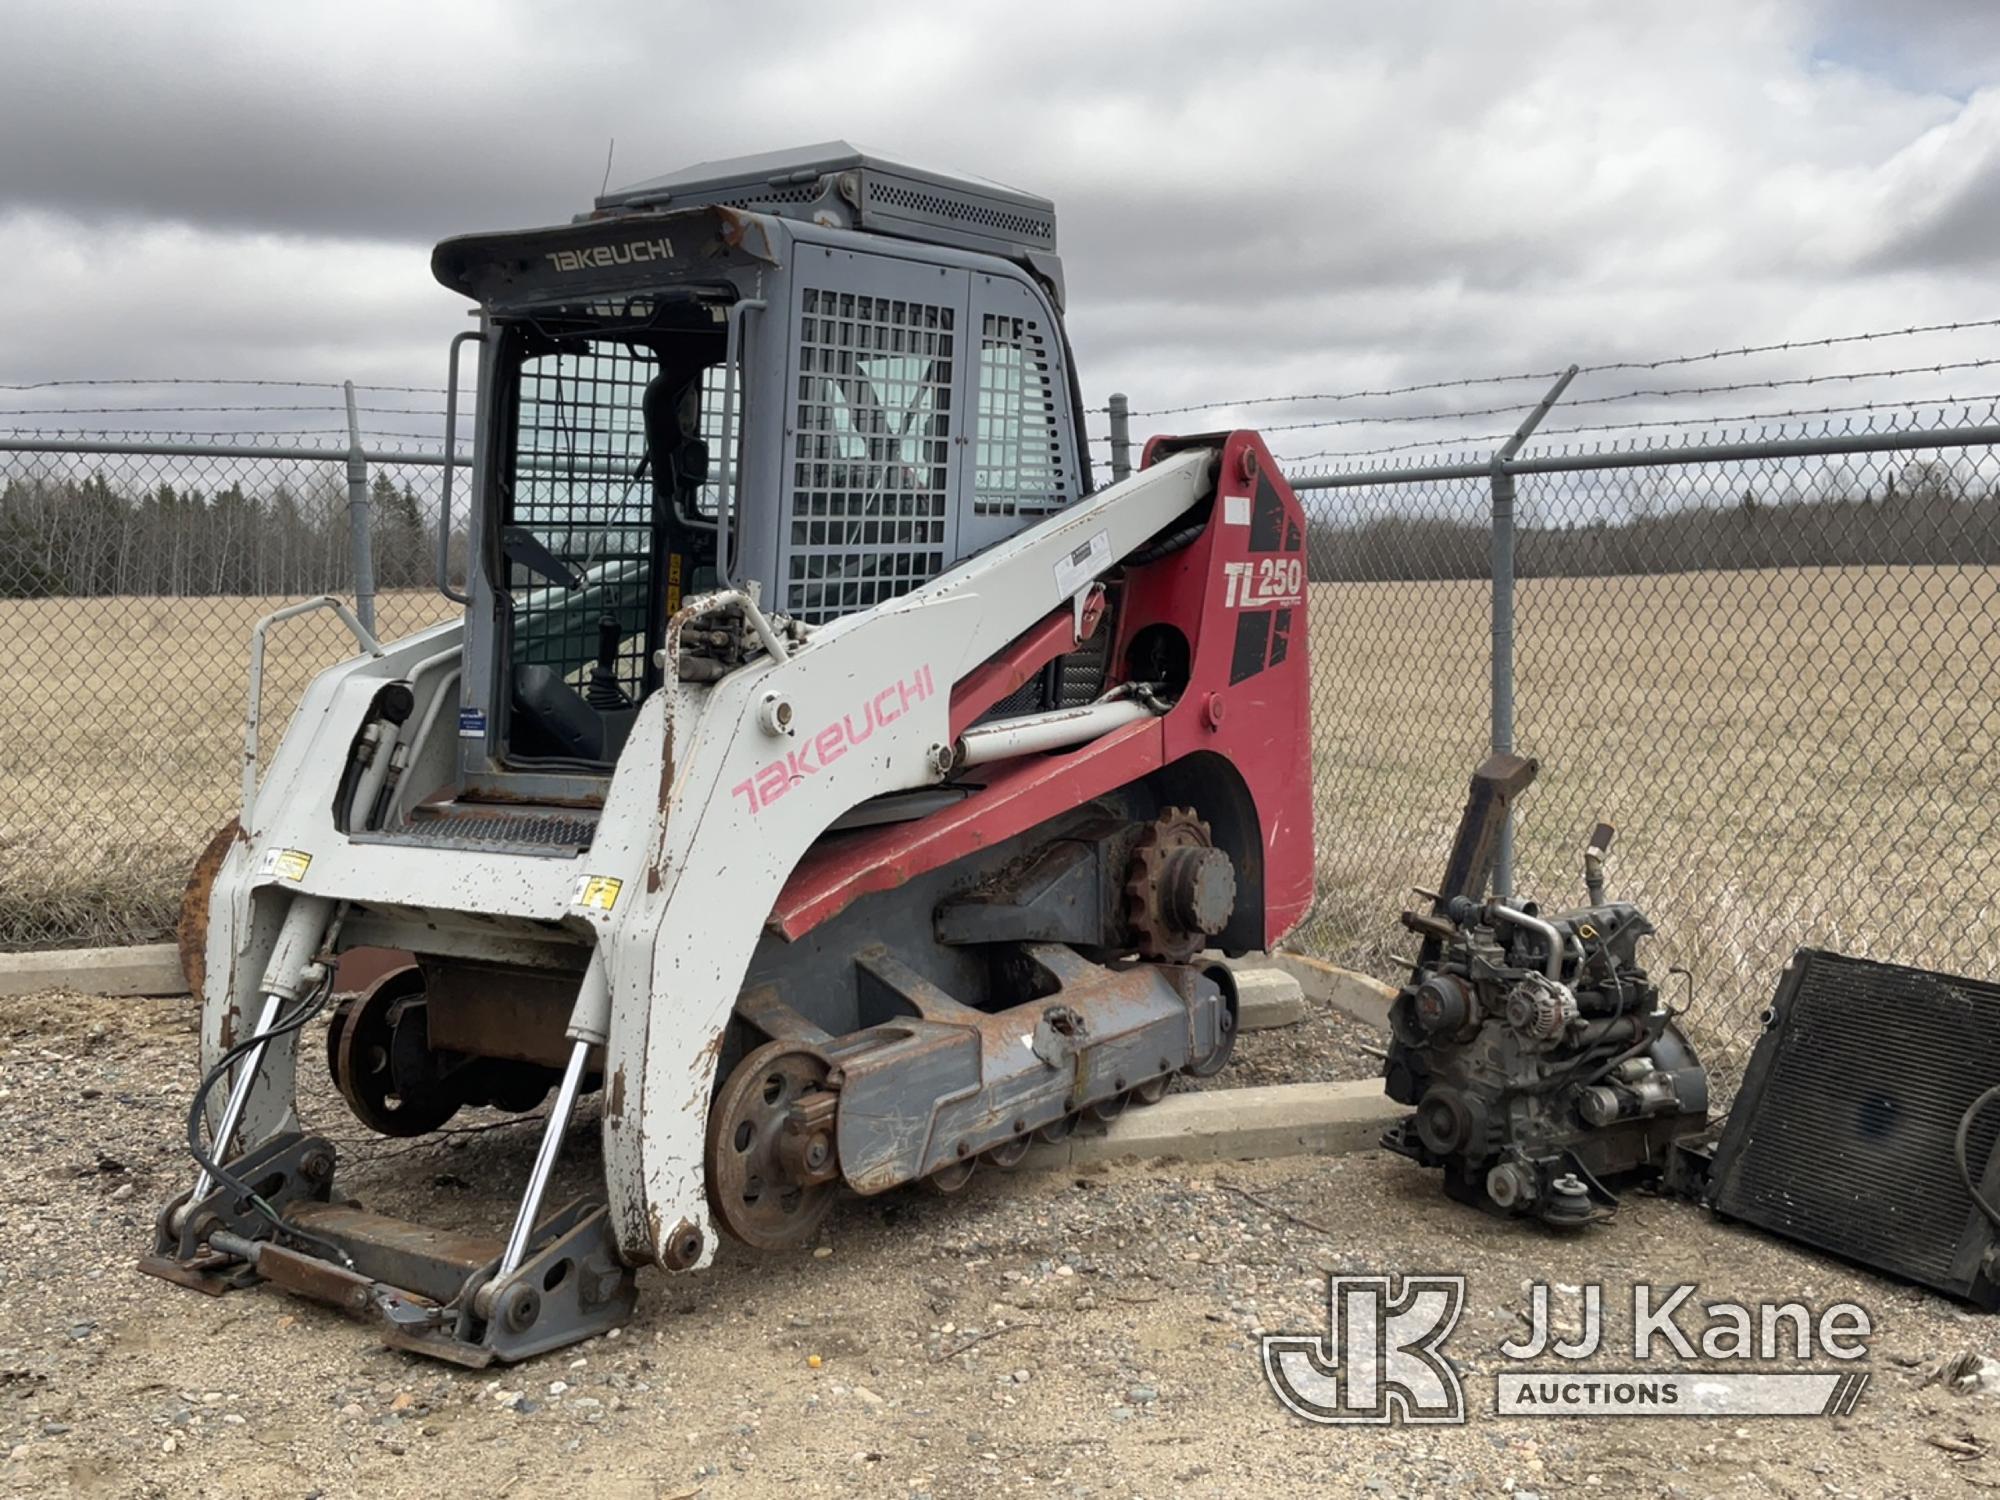 (Bagley, MN) 2010 Takeuchi TL250 Tracked Skid Steer Loader, Electrical Co-Op Owned Not Running, Cond